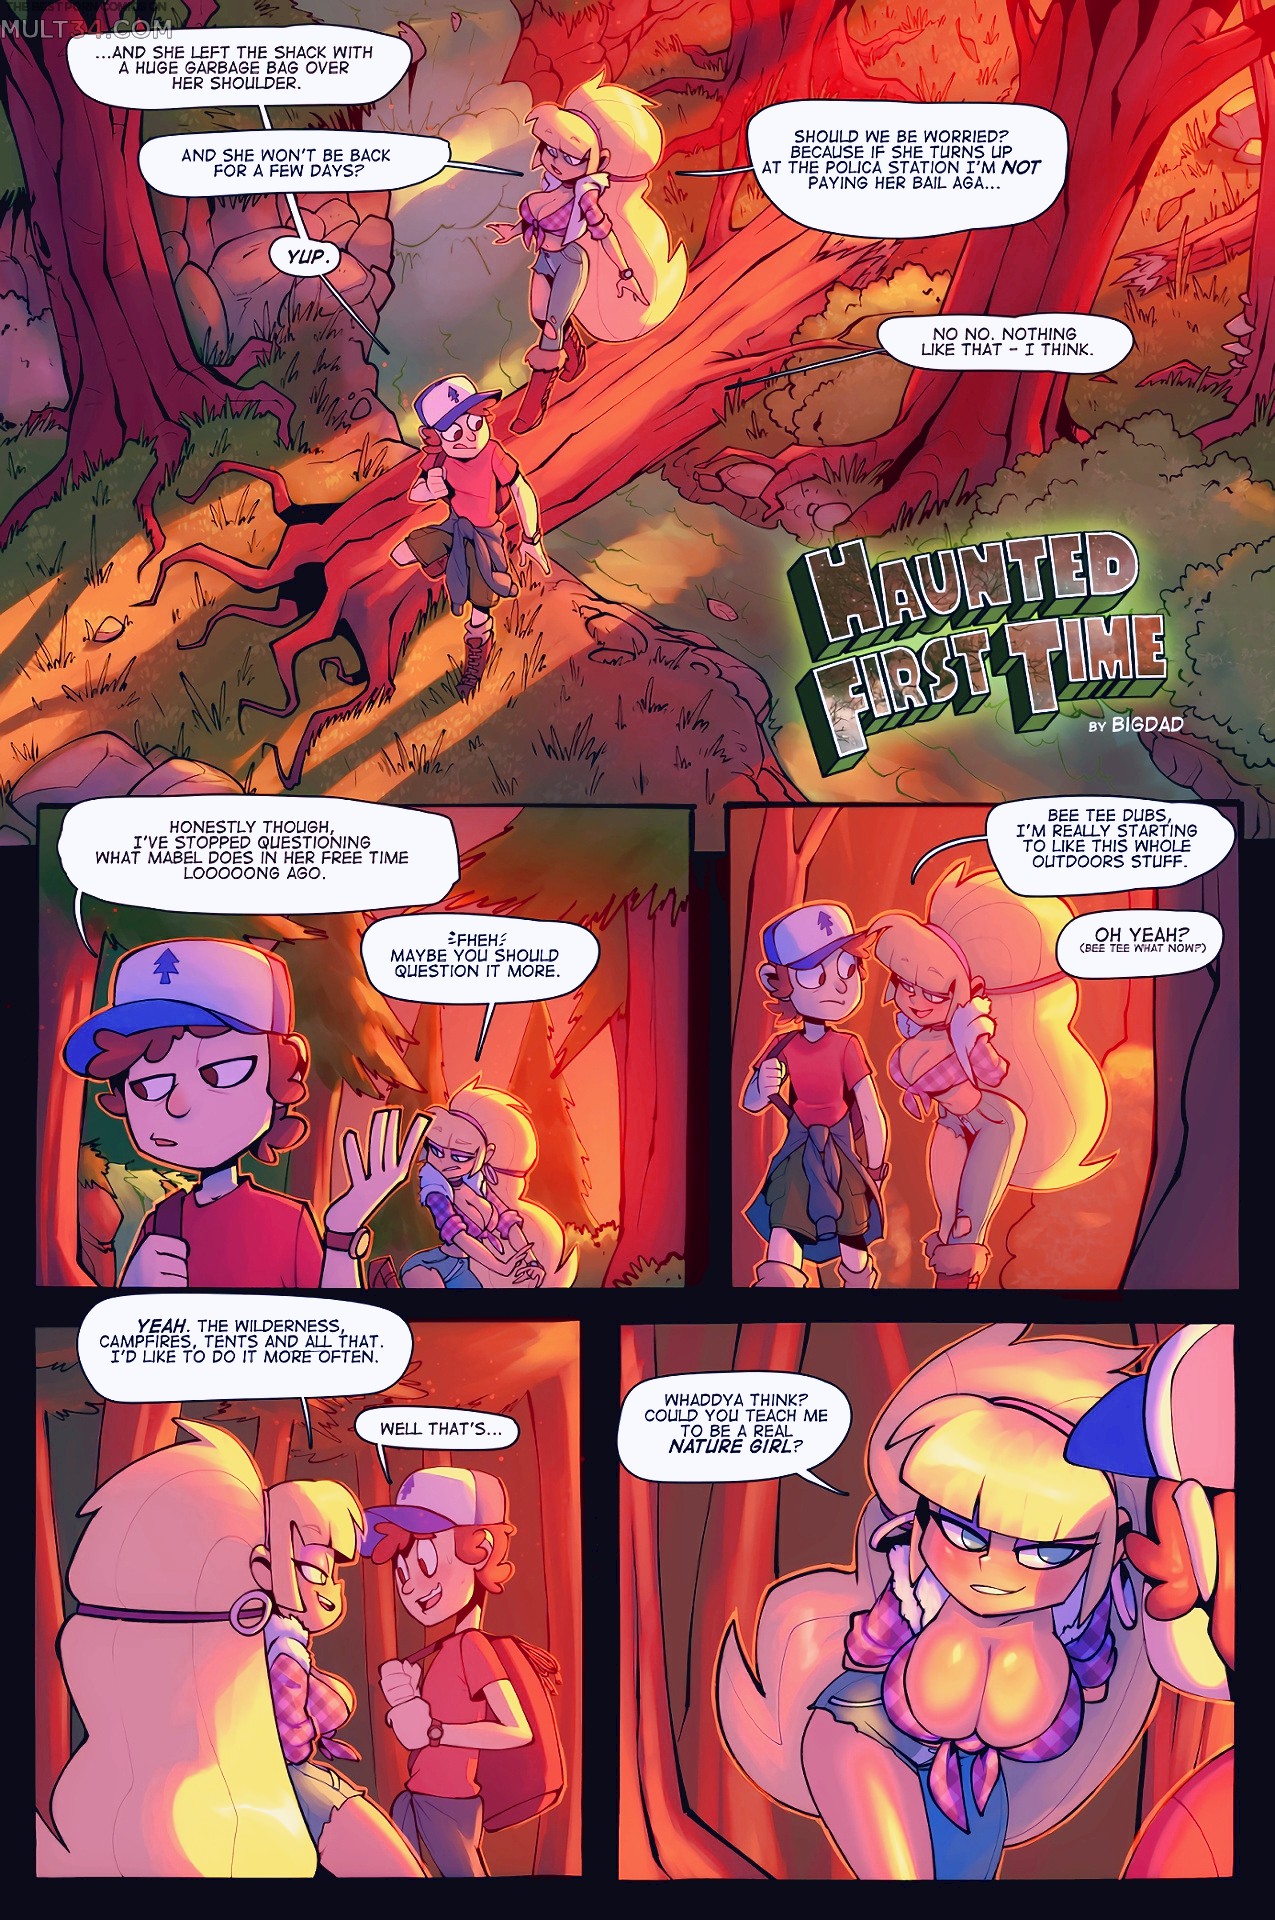 Gravity Falls Dipper And Pacifica Porn - Haunted First Time porn comic - the best cartoon porn comics, Rule 34 |  MULT34